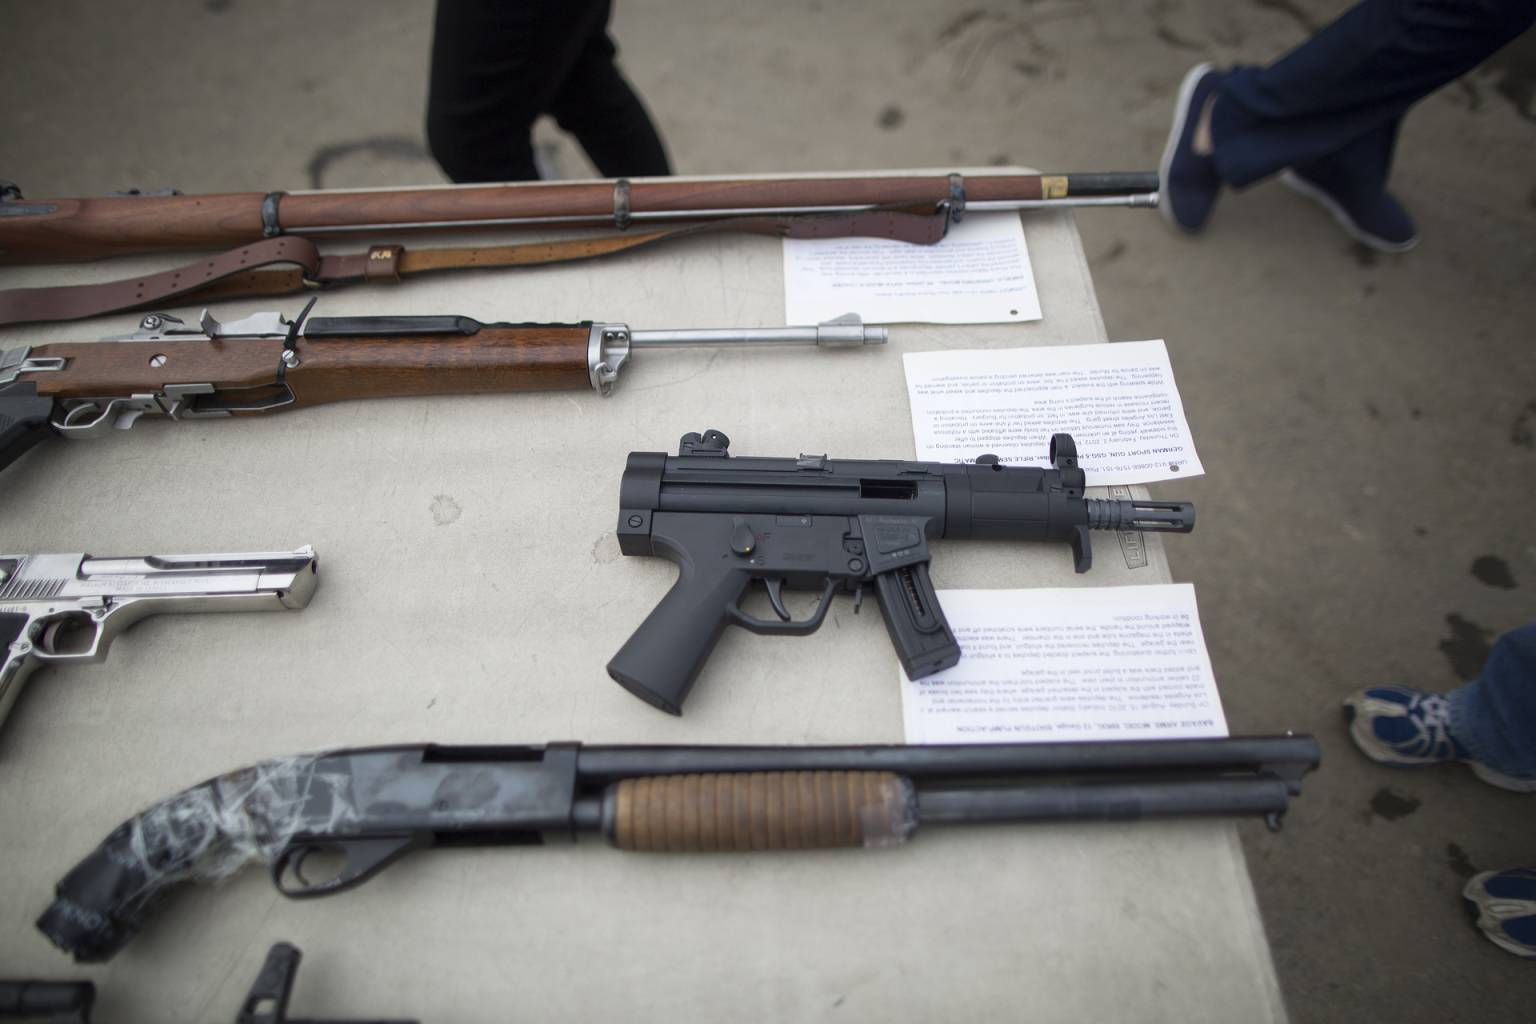 Study: Los Angeles County’s Growing Youth Firearm Crisis